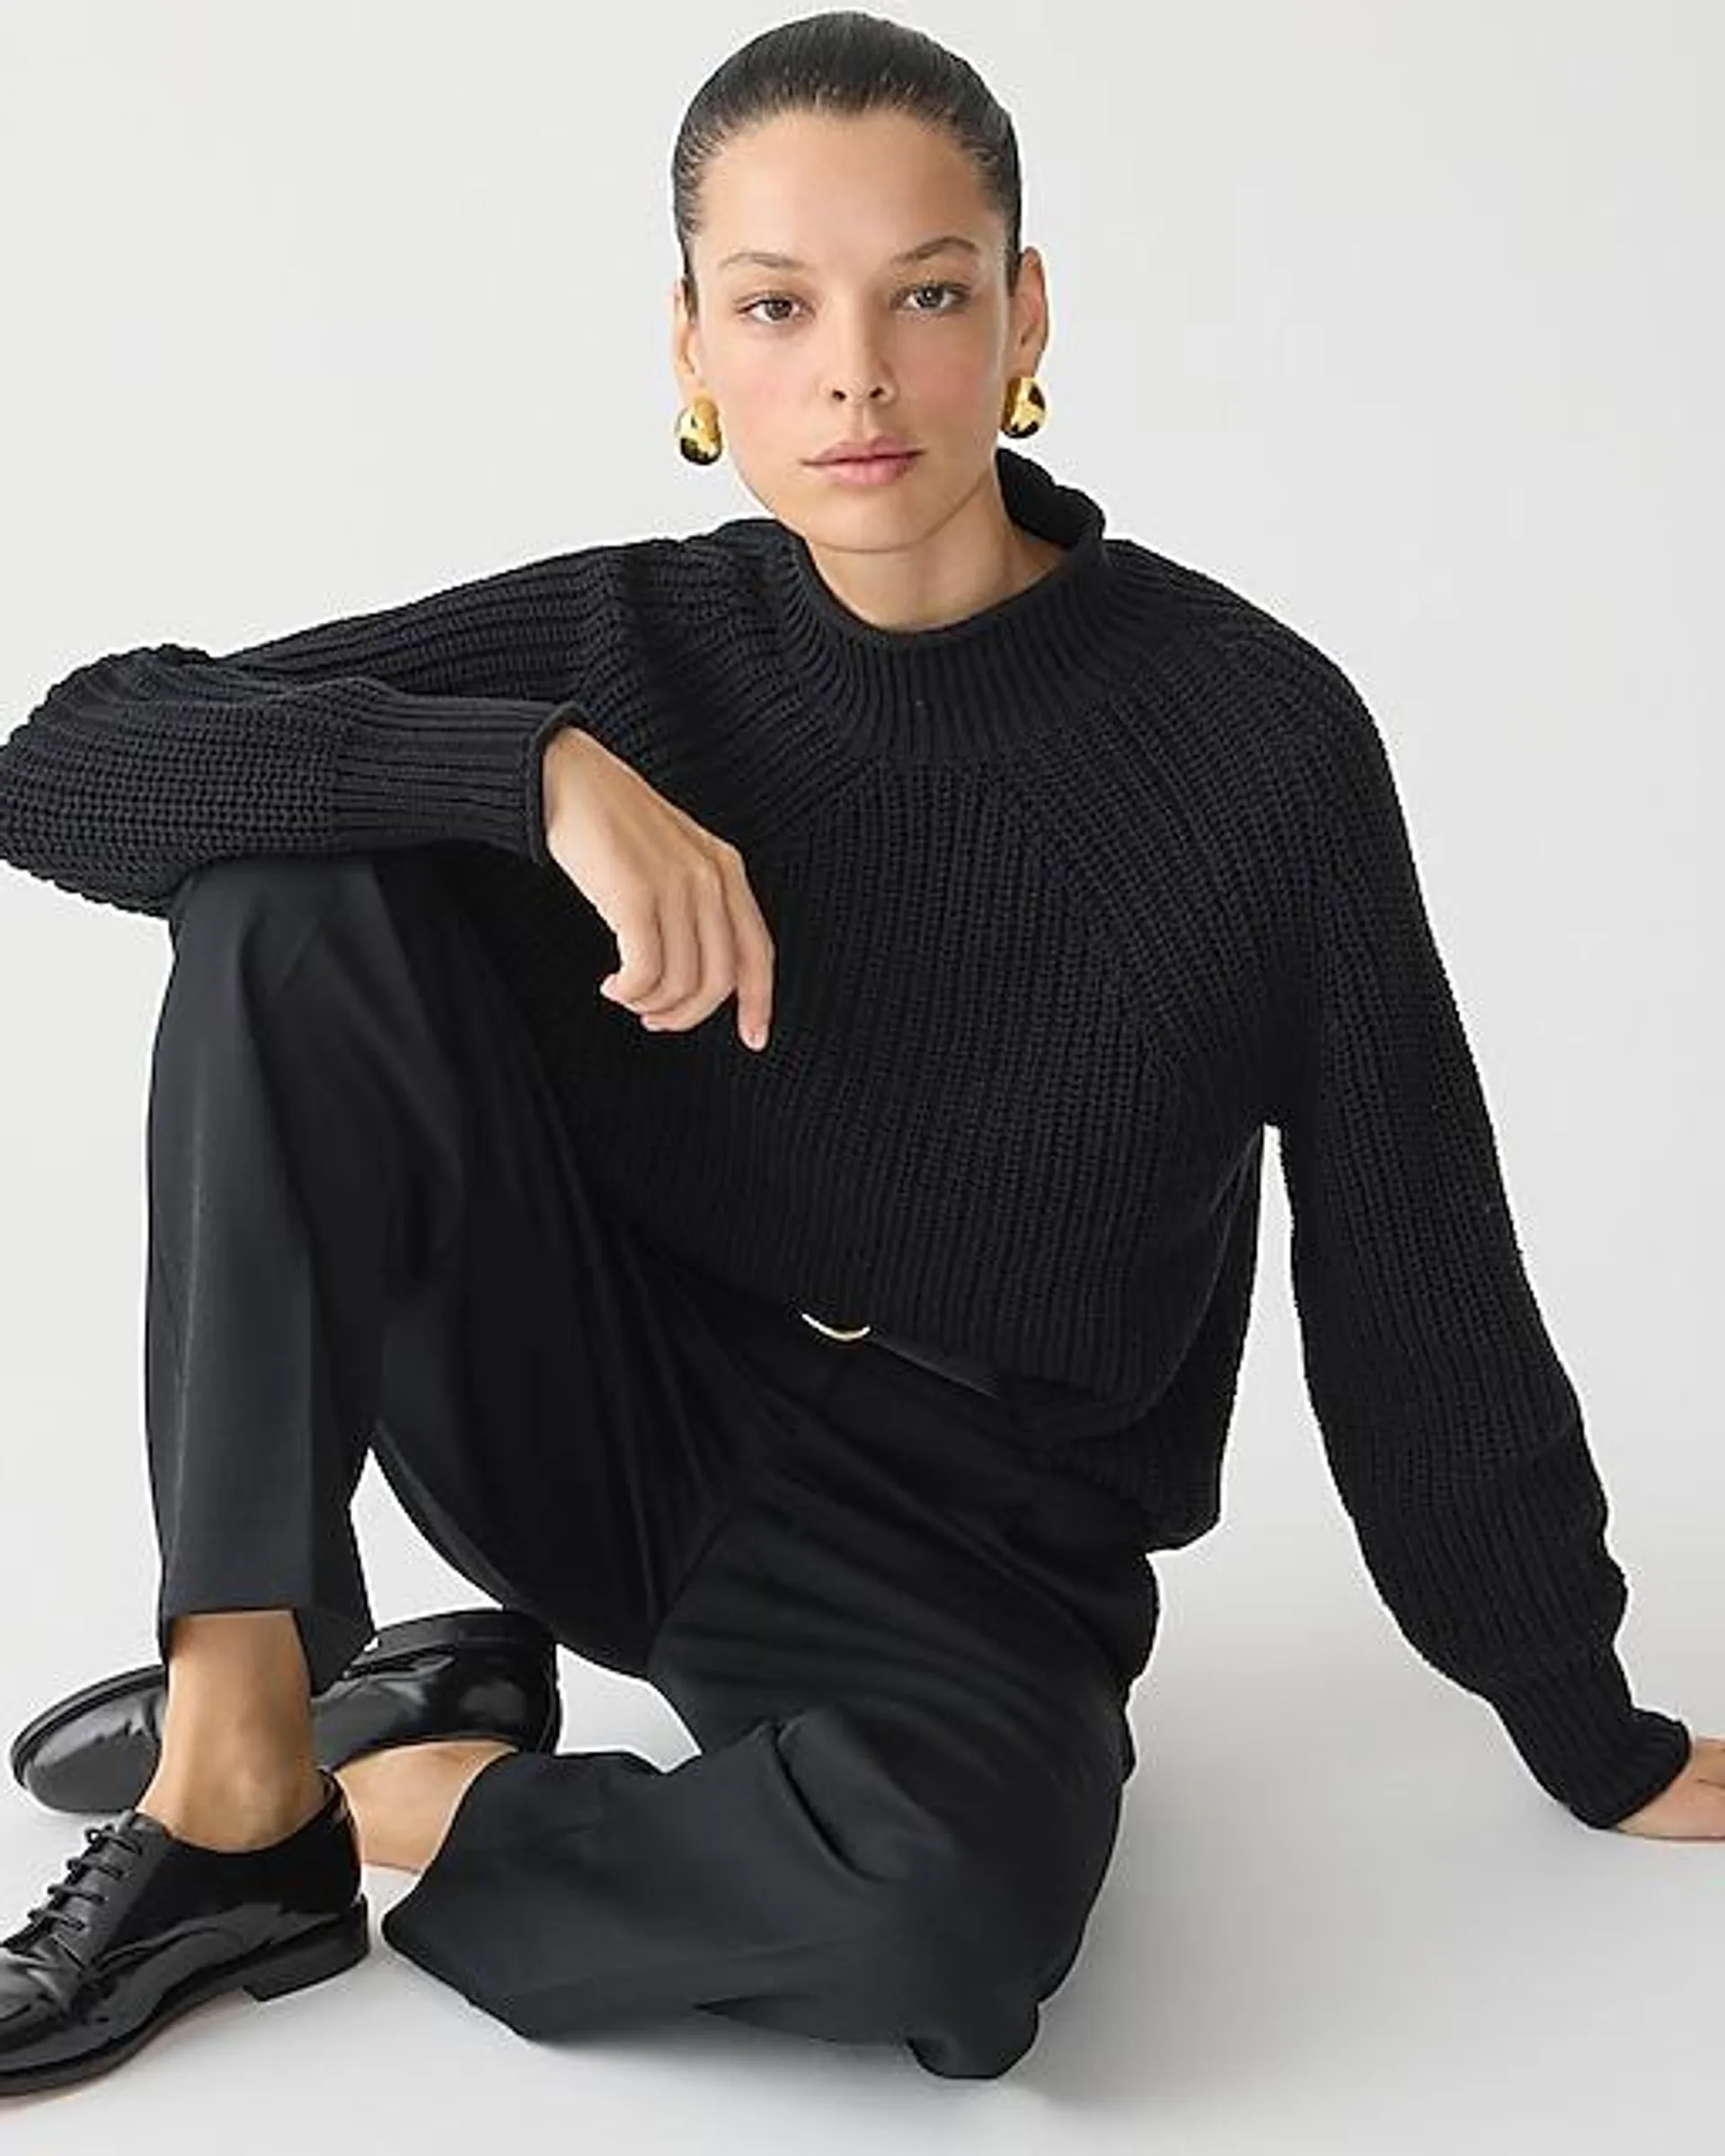 Relaxed Rollneck™ sweater